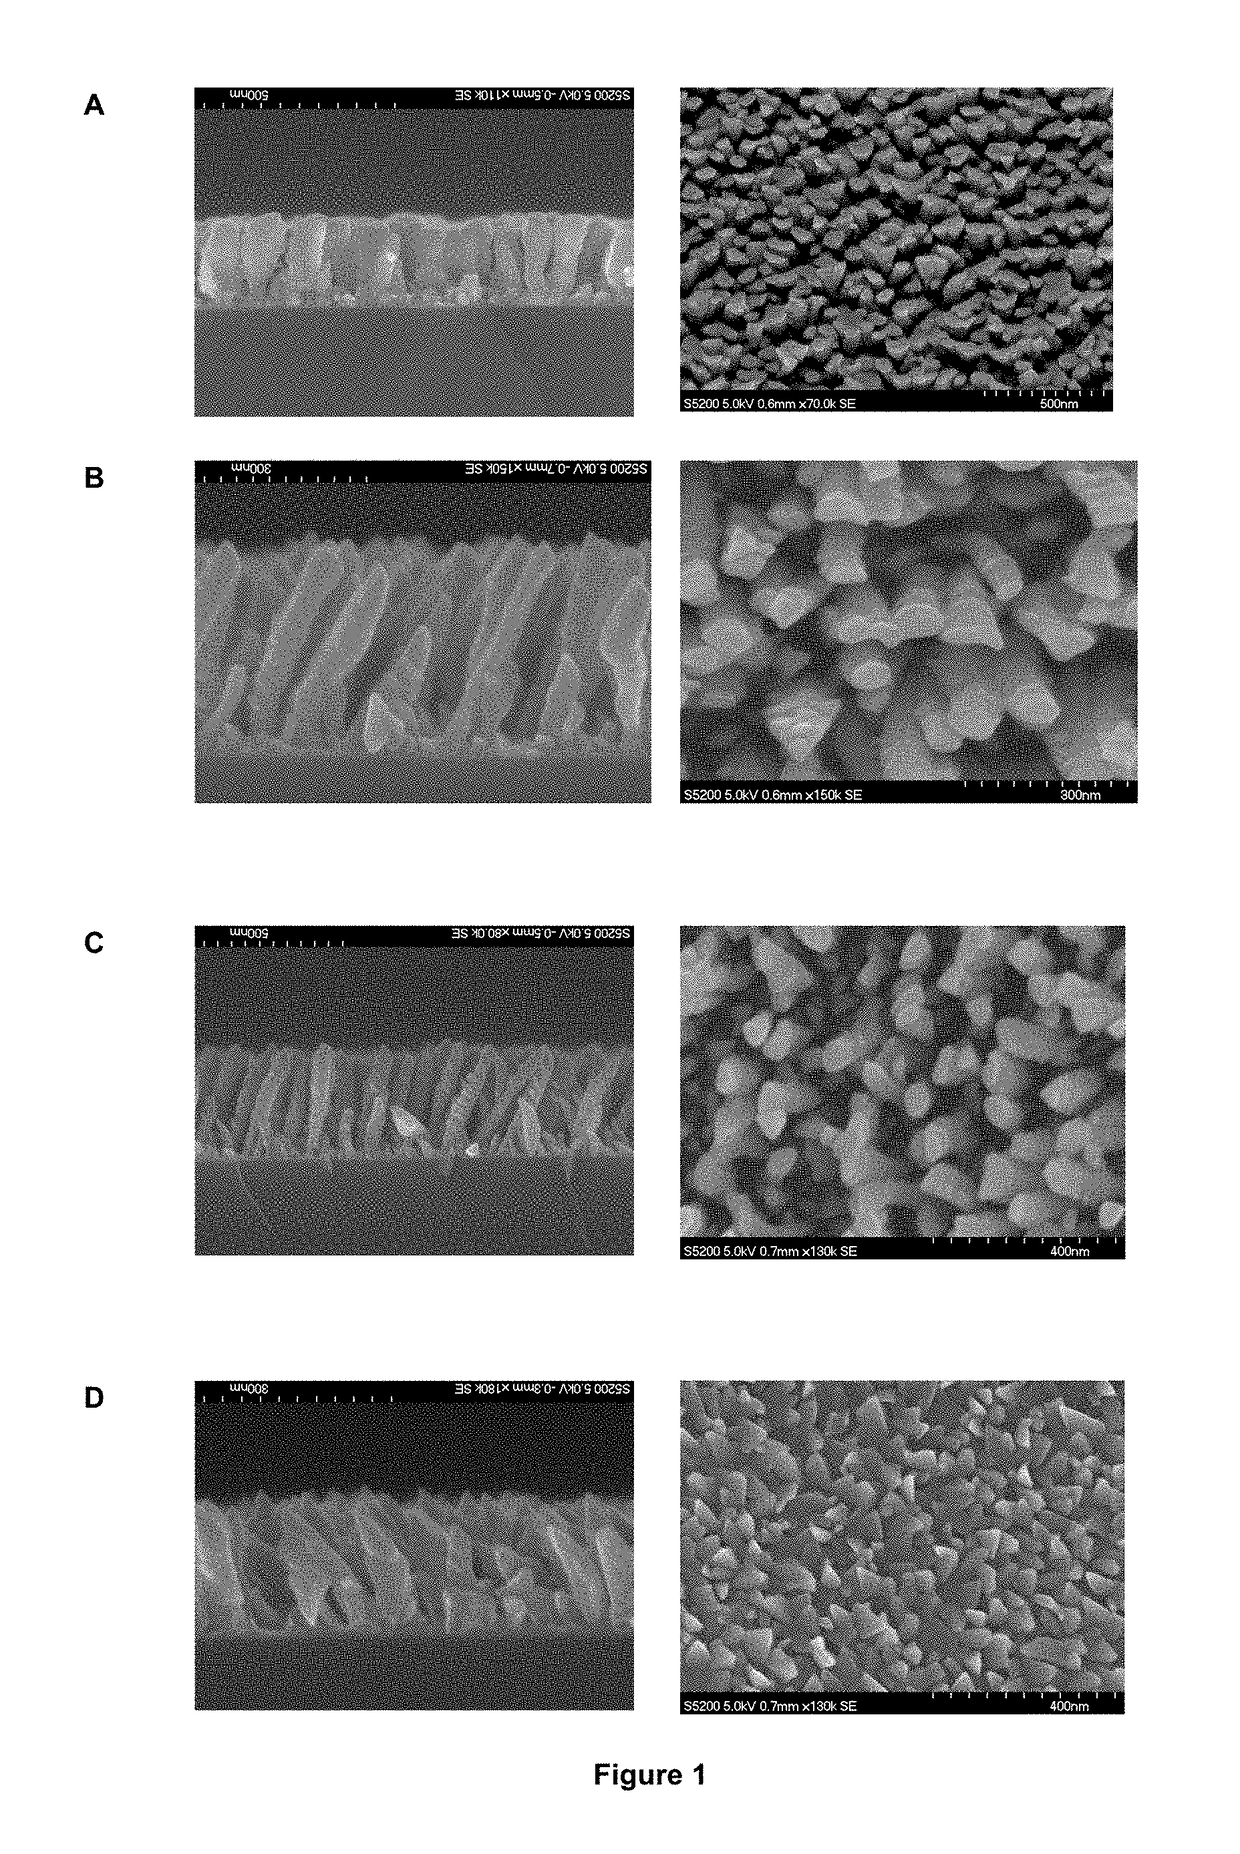 Biocompatible implants made of nanostructured titanium with antibacterial properties